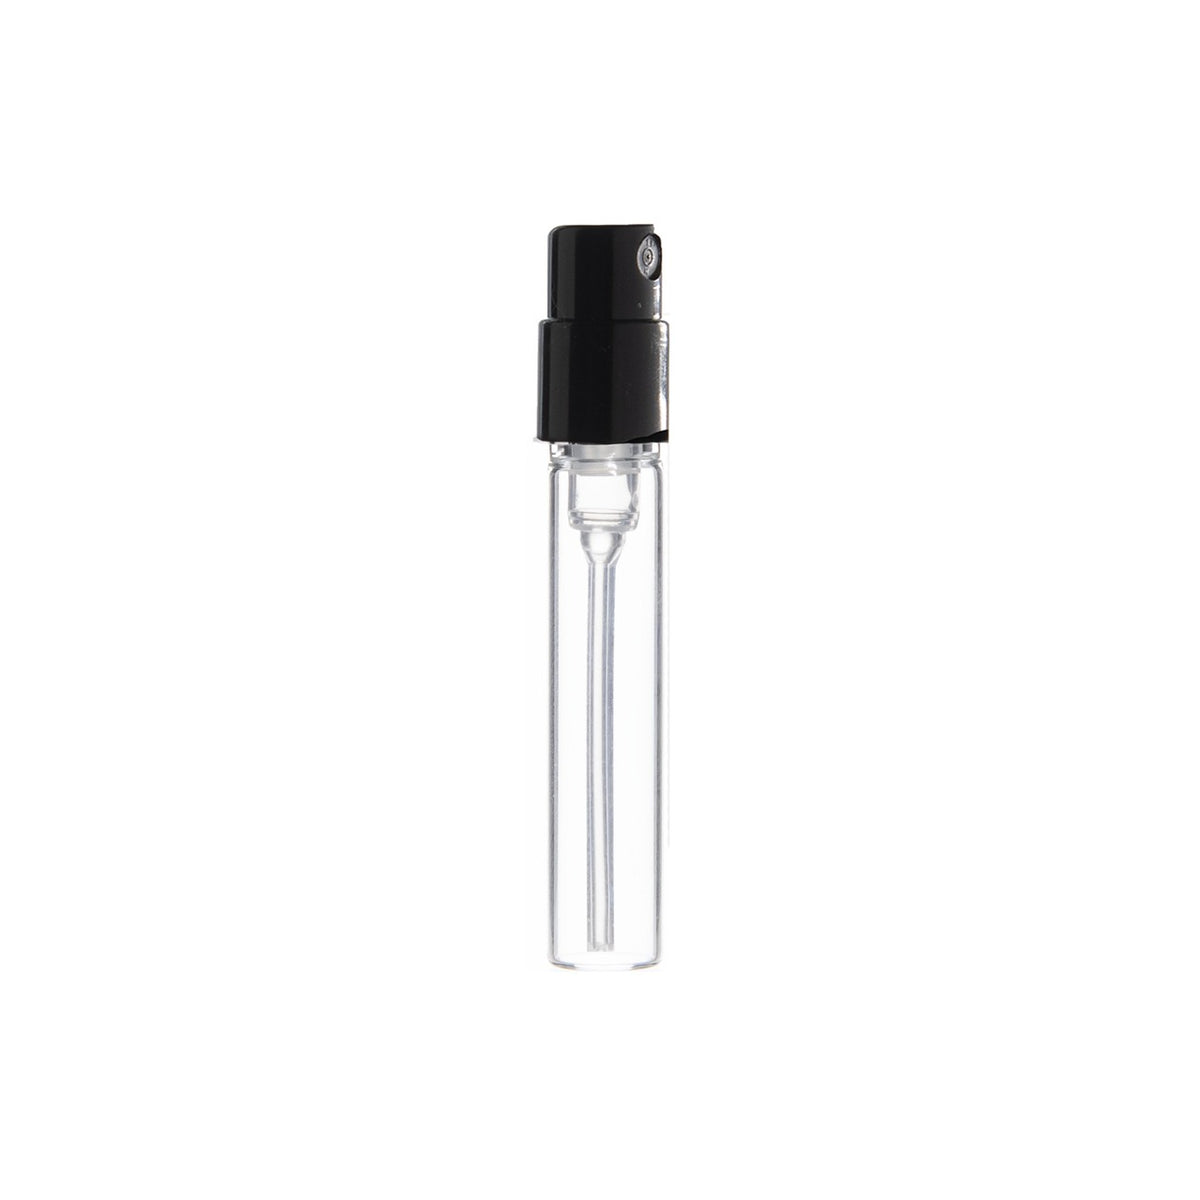 Clean Team Black by Get Right Fragrance EDP